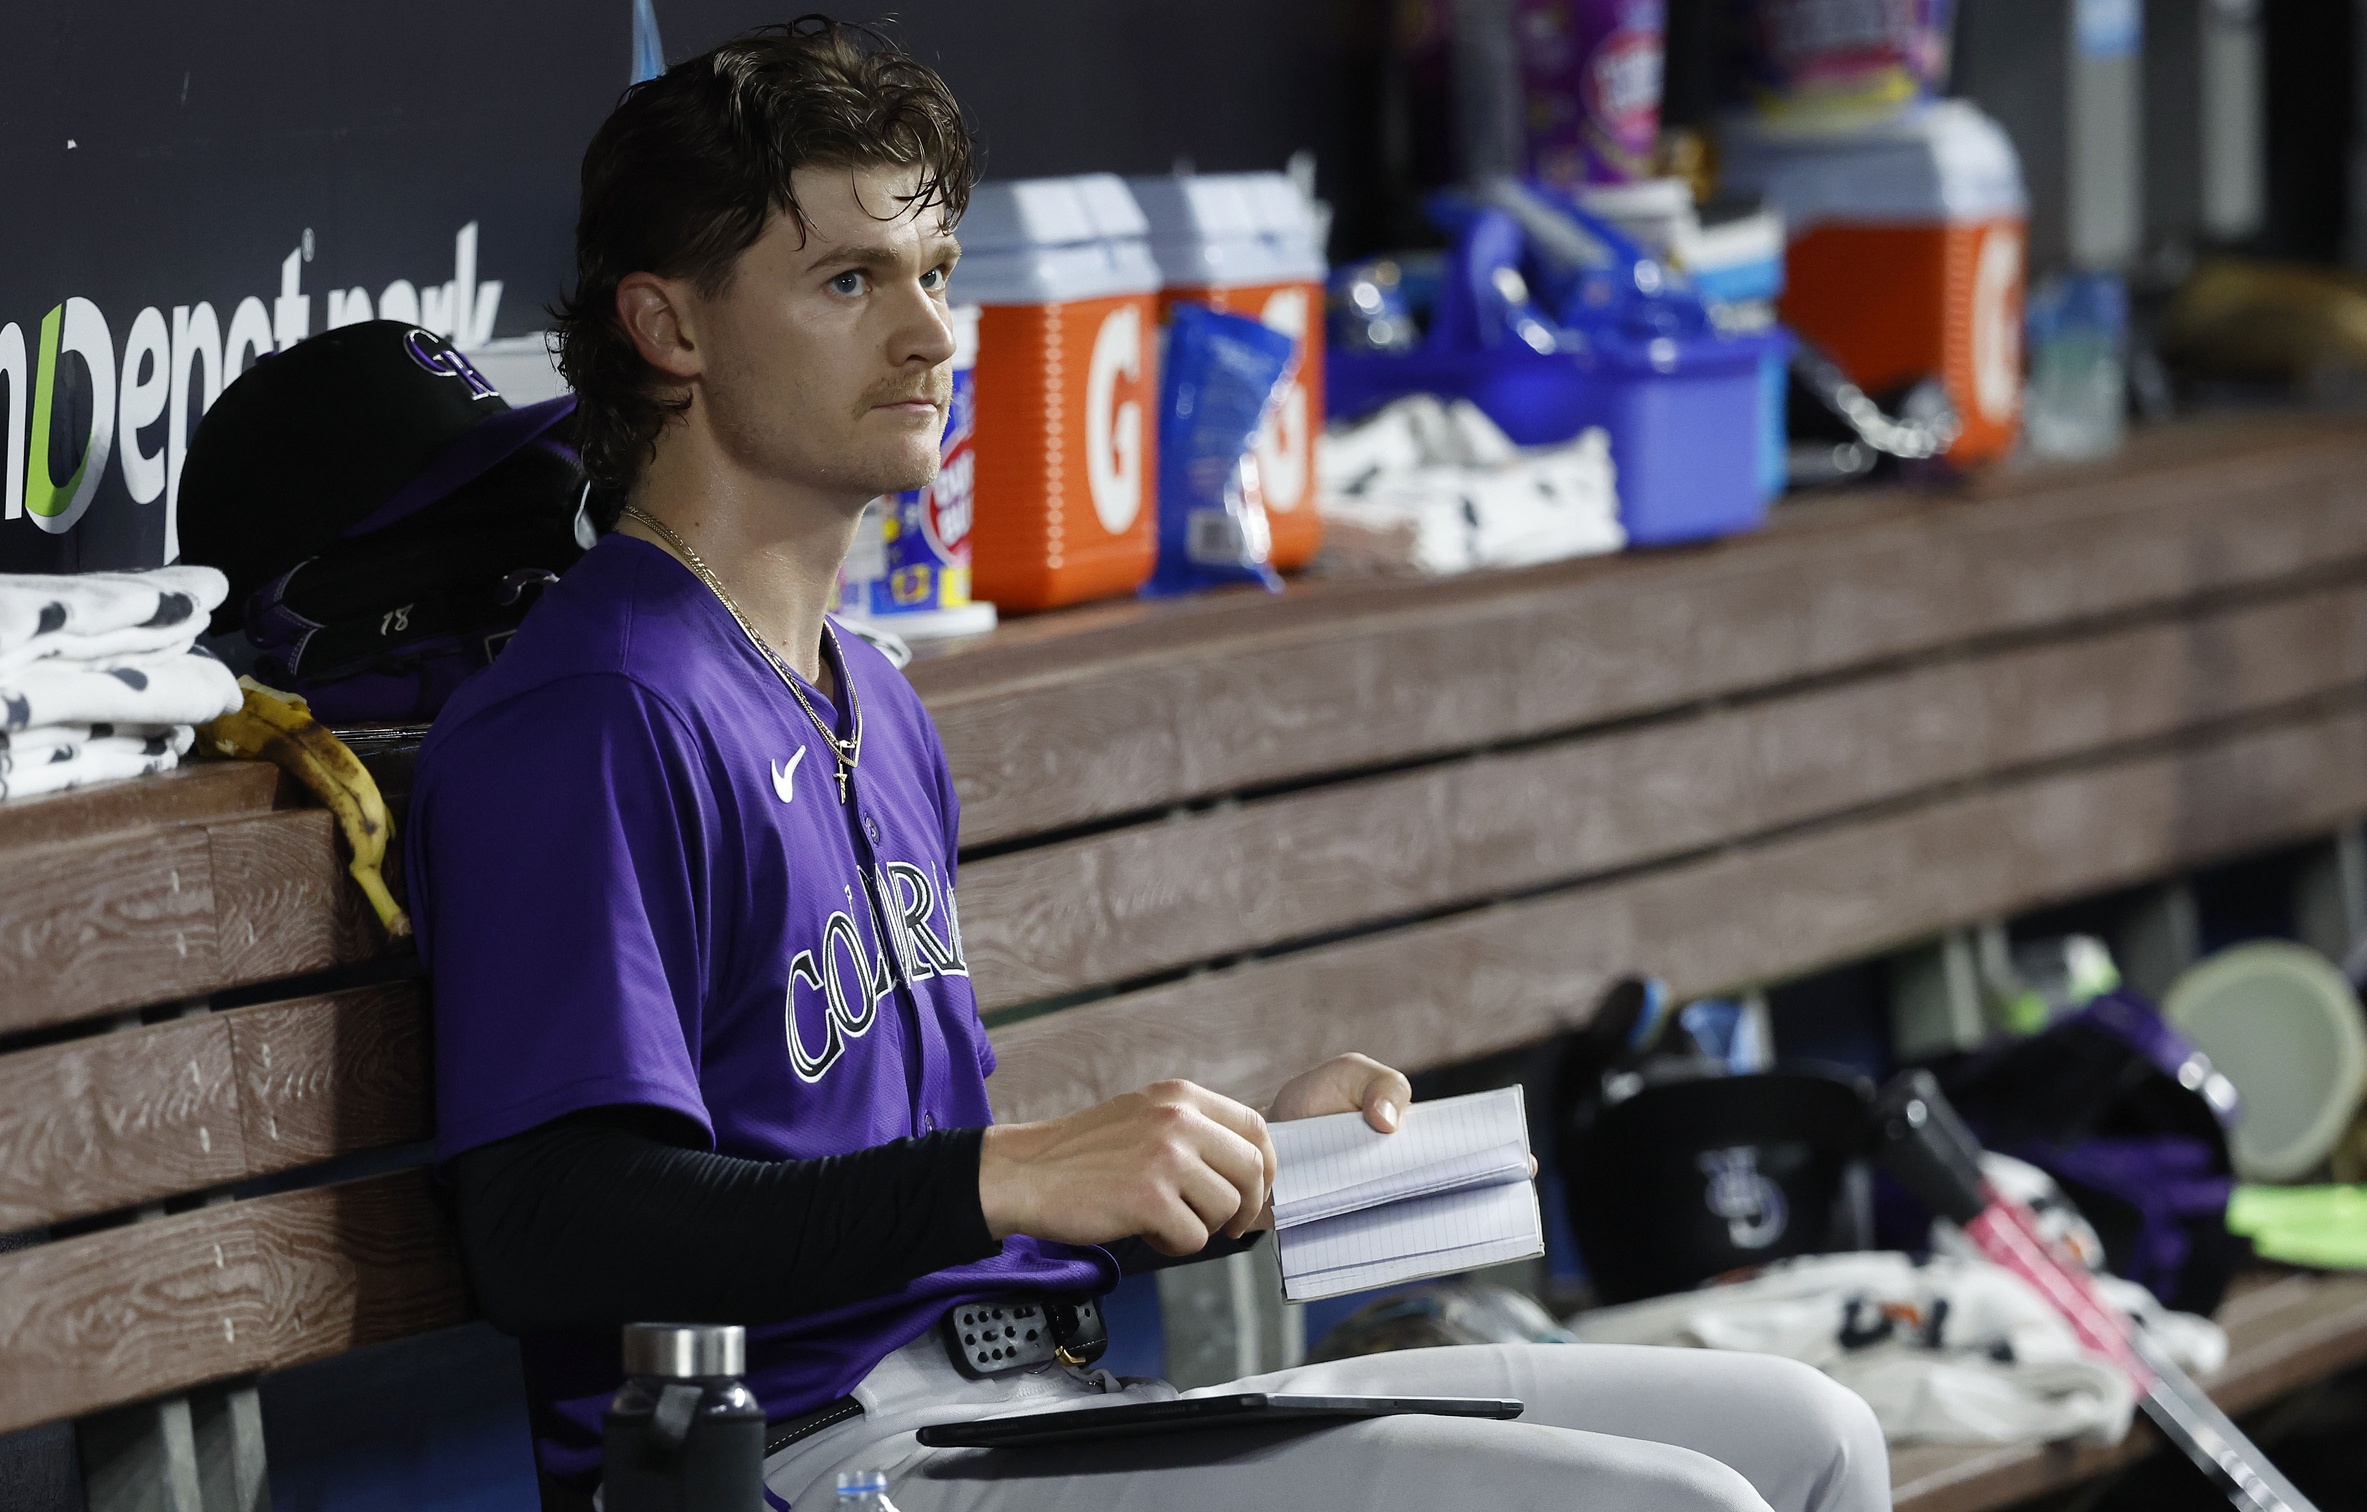 Colorado Rockies Historic MLB Game: Trailing Record Broken and Young Prospects Shine